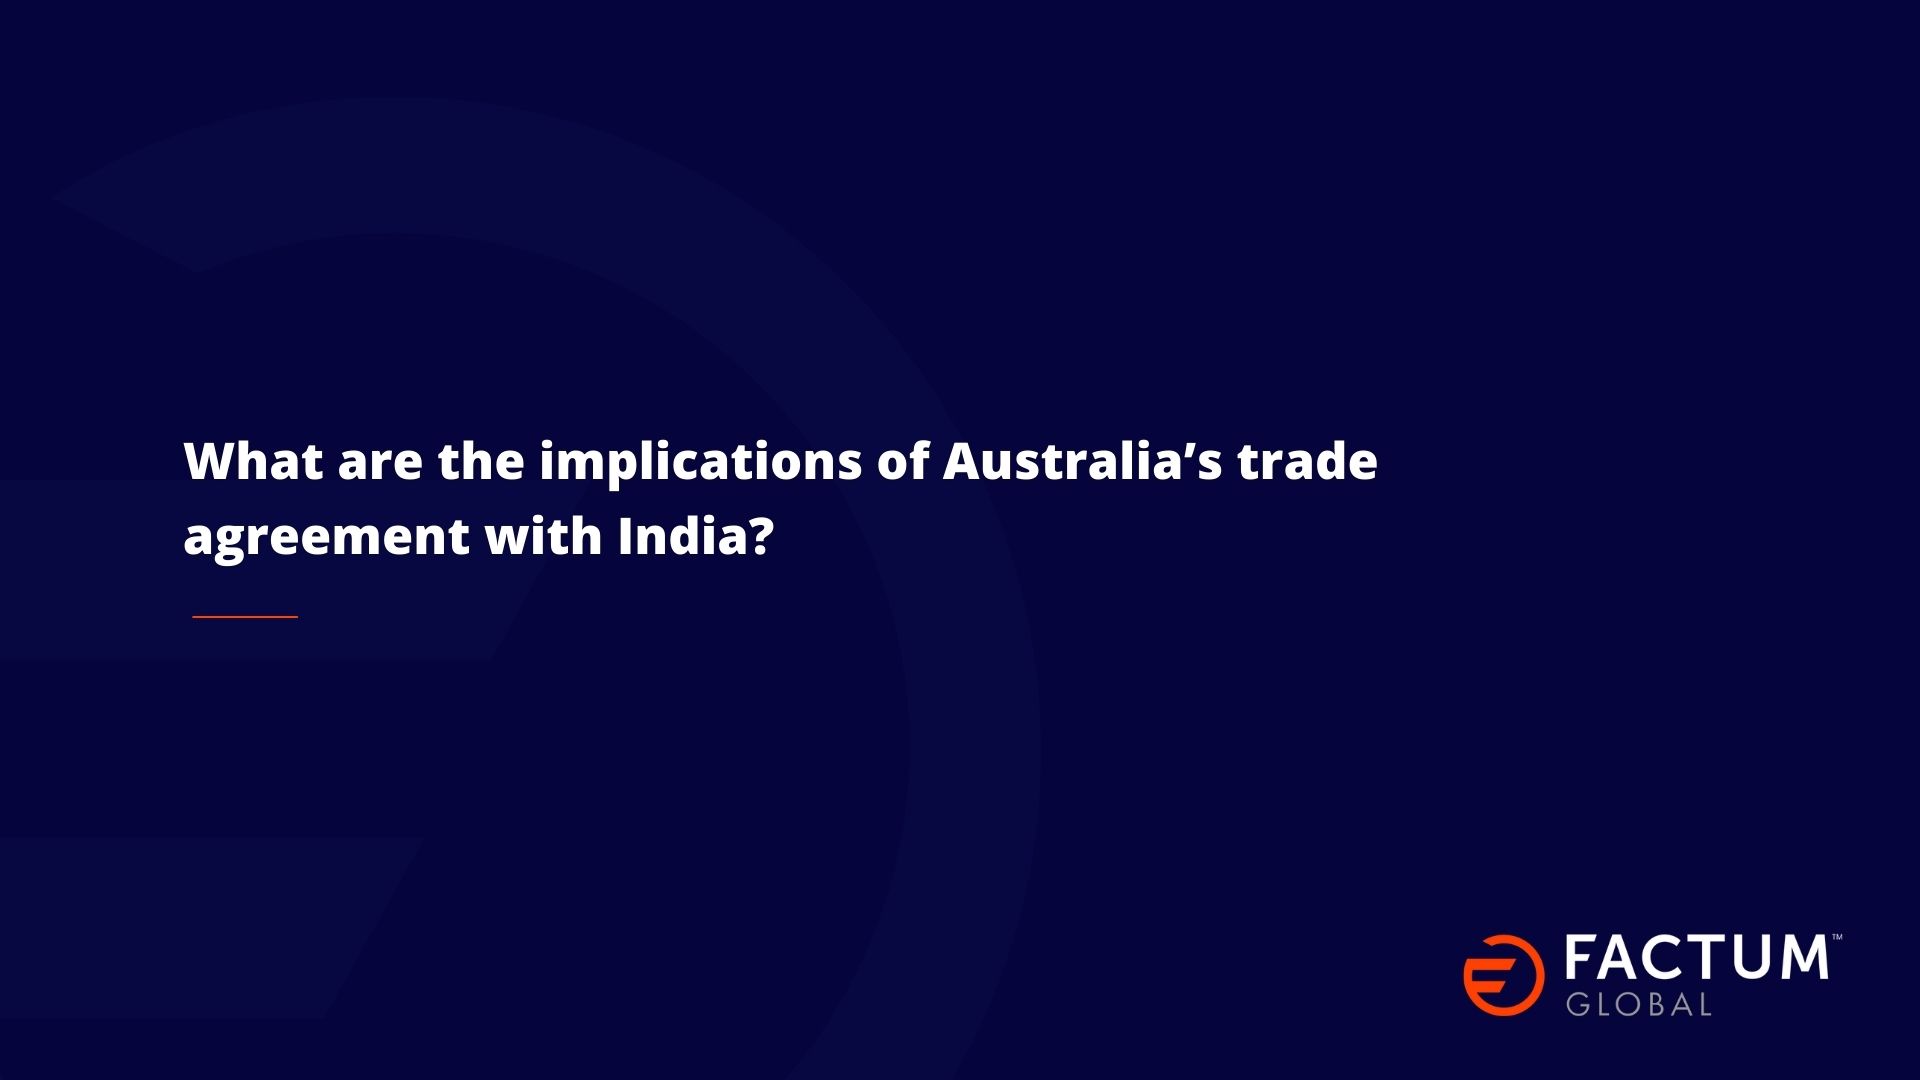 Australia's trade agreement with India